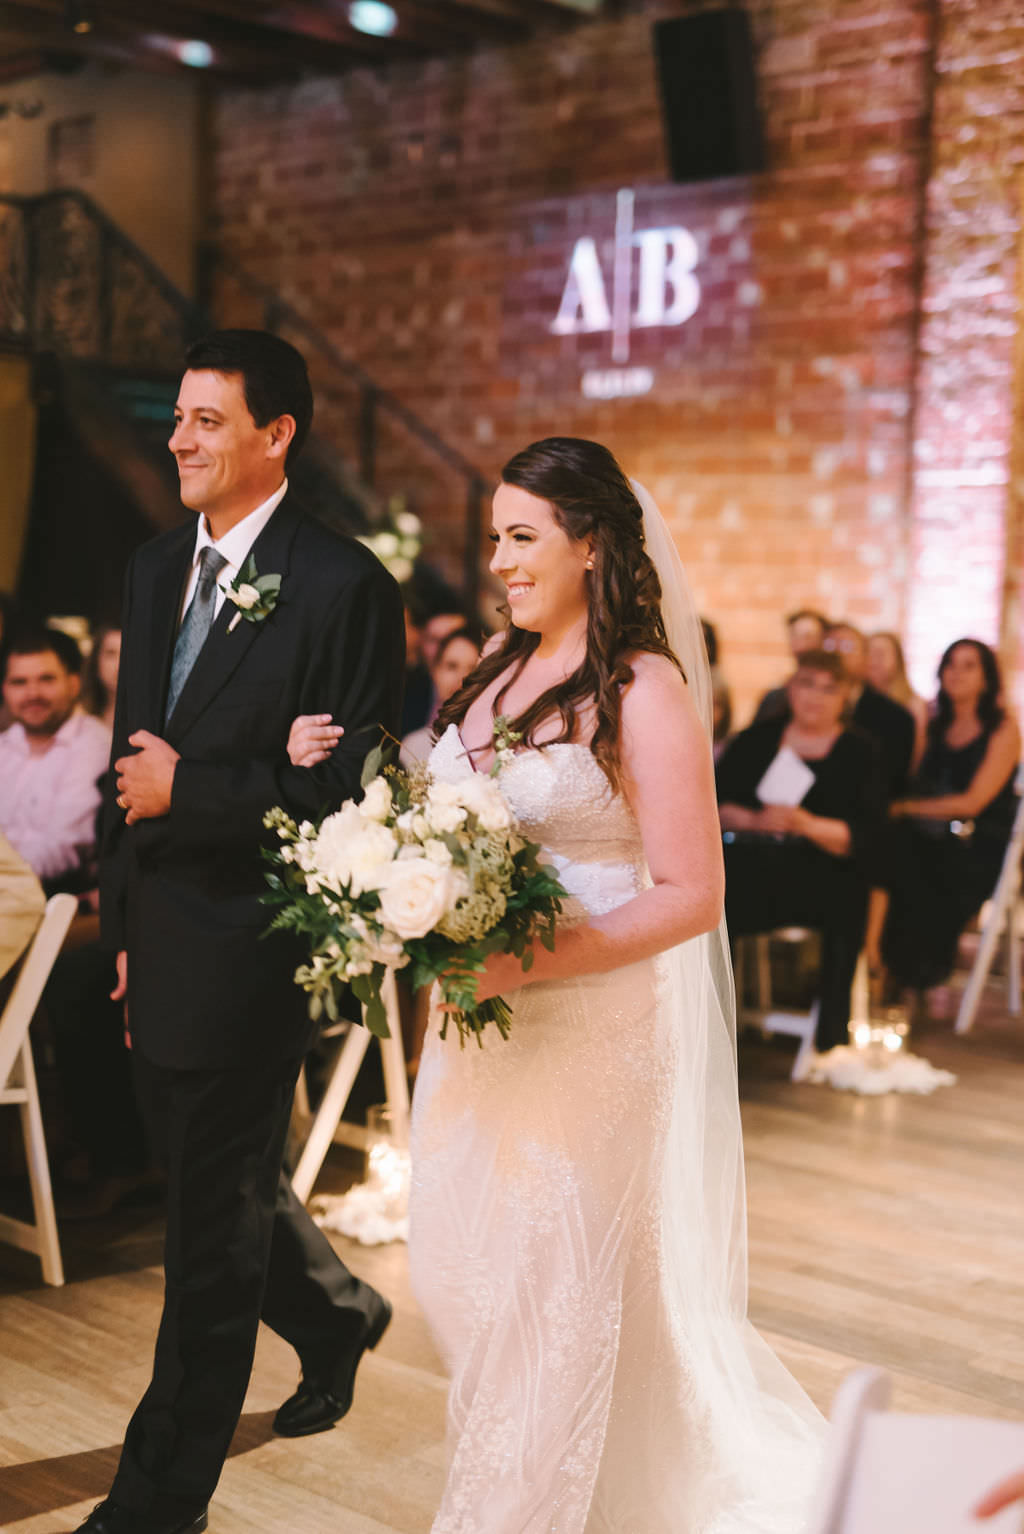 Modern Florida Bride and Father Walk Down the Aisle, Holding White and Greenery Floral Bouquet, Indoor Wedding Processional | Tampa Bay Venue NOVA 535 | St. Pete Photographer Kera Photography